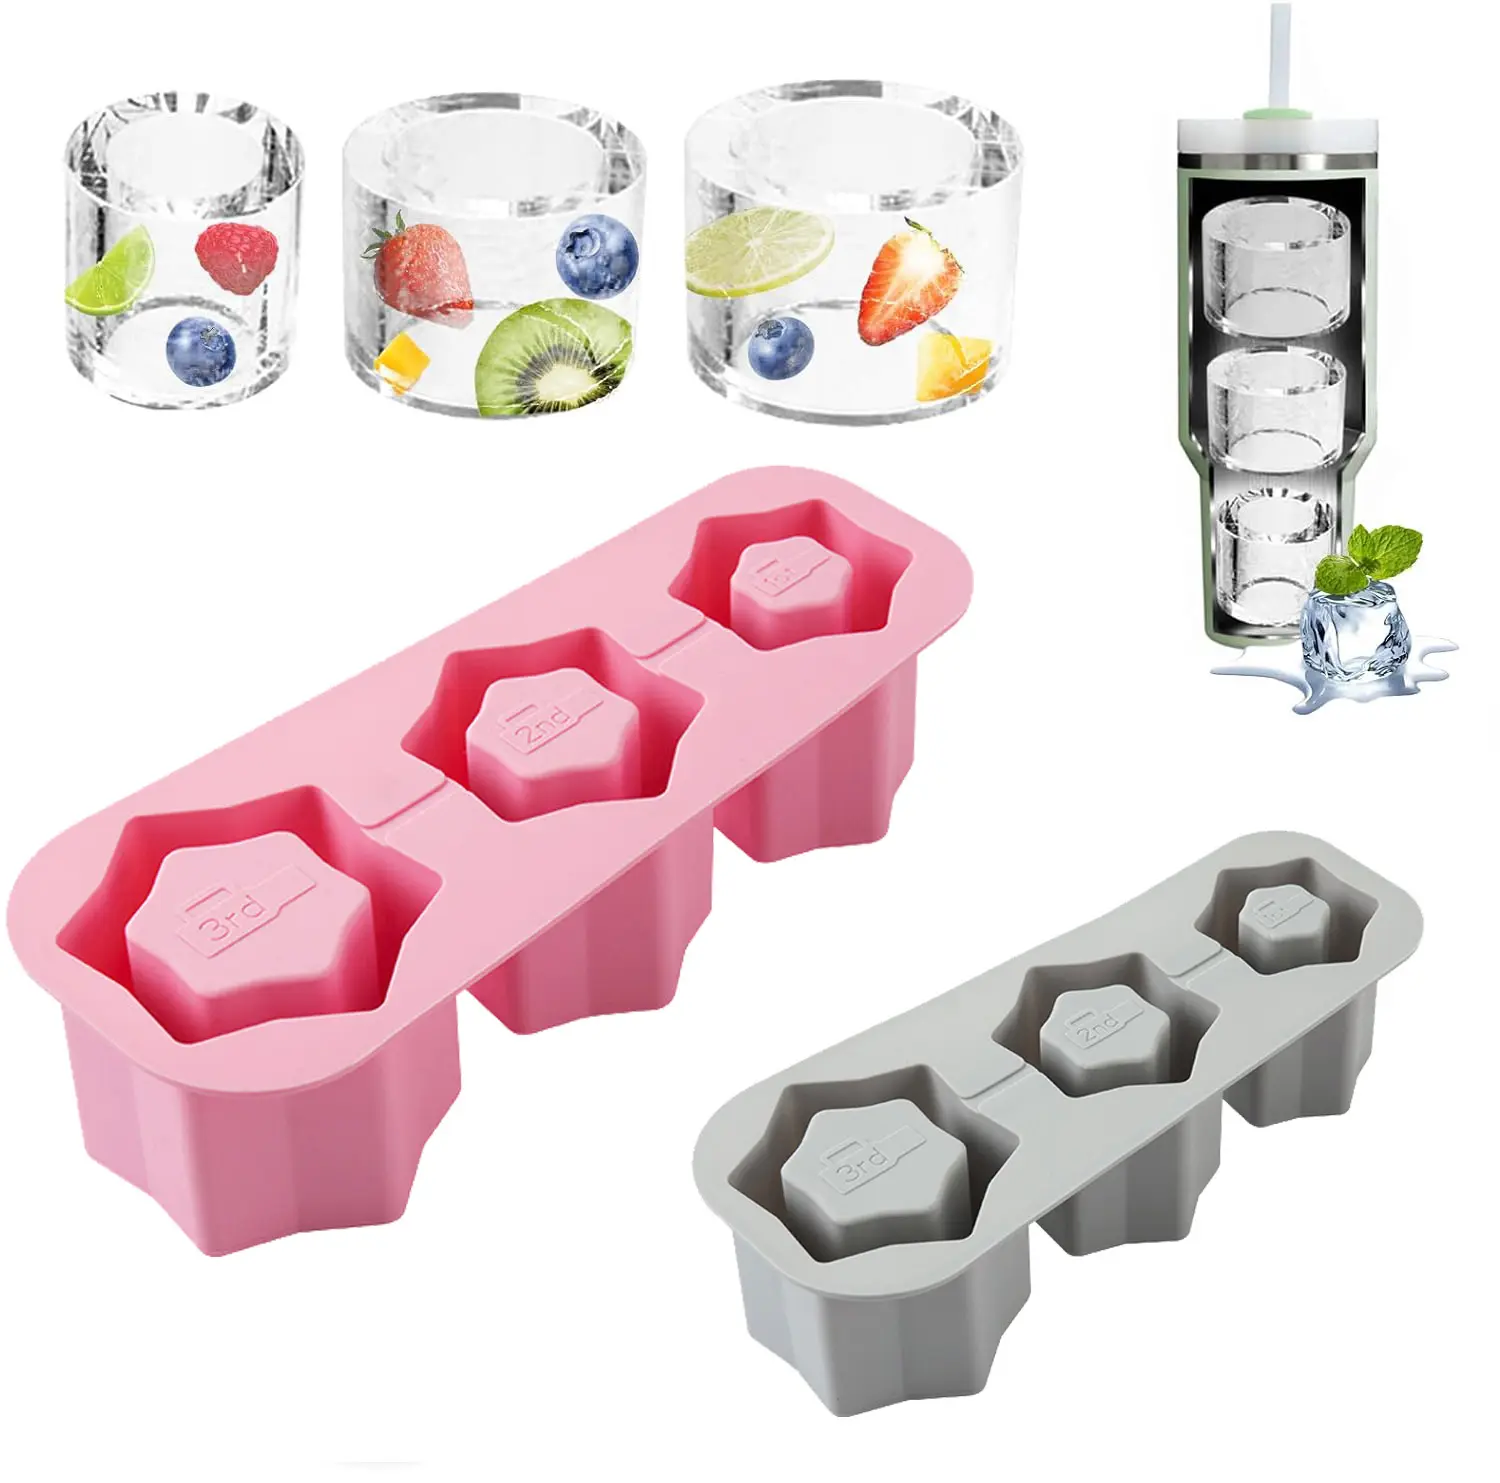 Early Riser Tcamp Ice Cube Tray for Tumbler Cup Silicone Ice Cube Molds for Chilling Drinks Easy Fill and Release Ice Maker